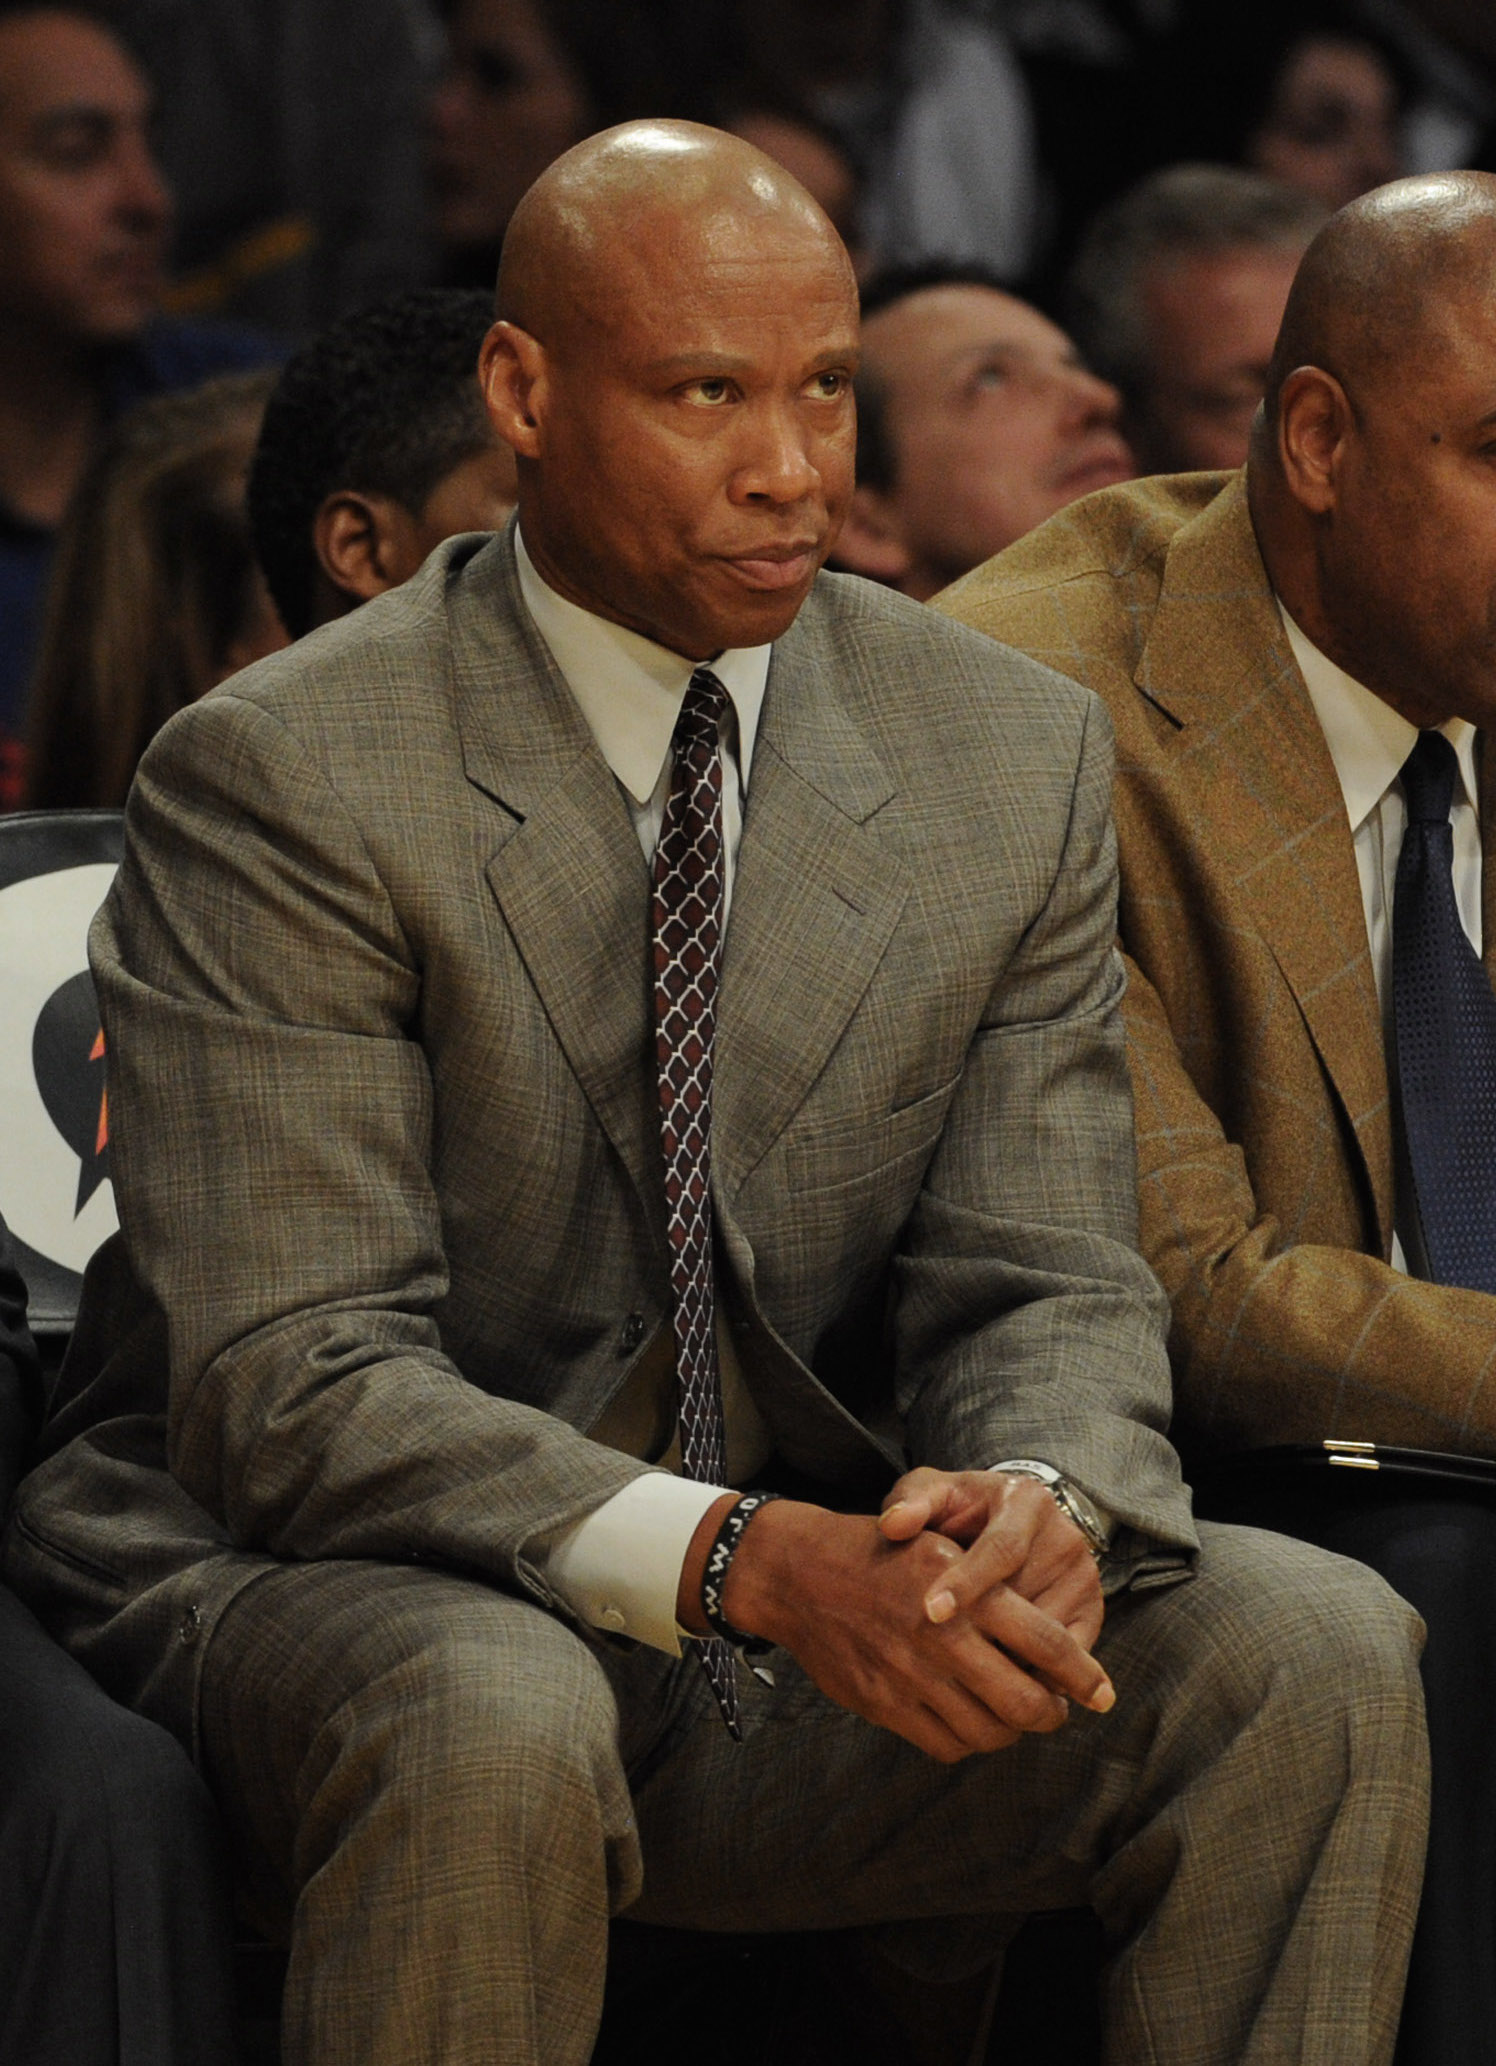 Lakers head coach Byron Scott, criticized the first unit for lacking trust. (Photo by Keith Birmingham/ Pasadena Star-News)